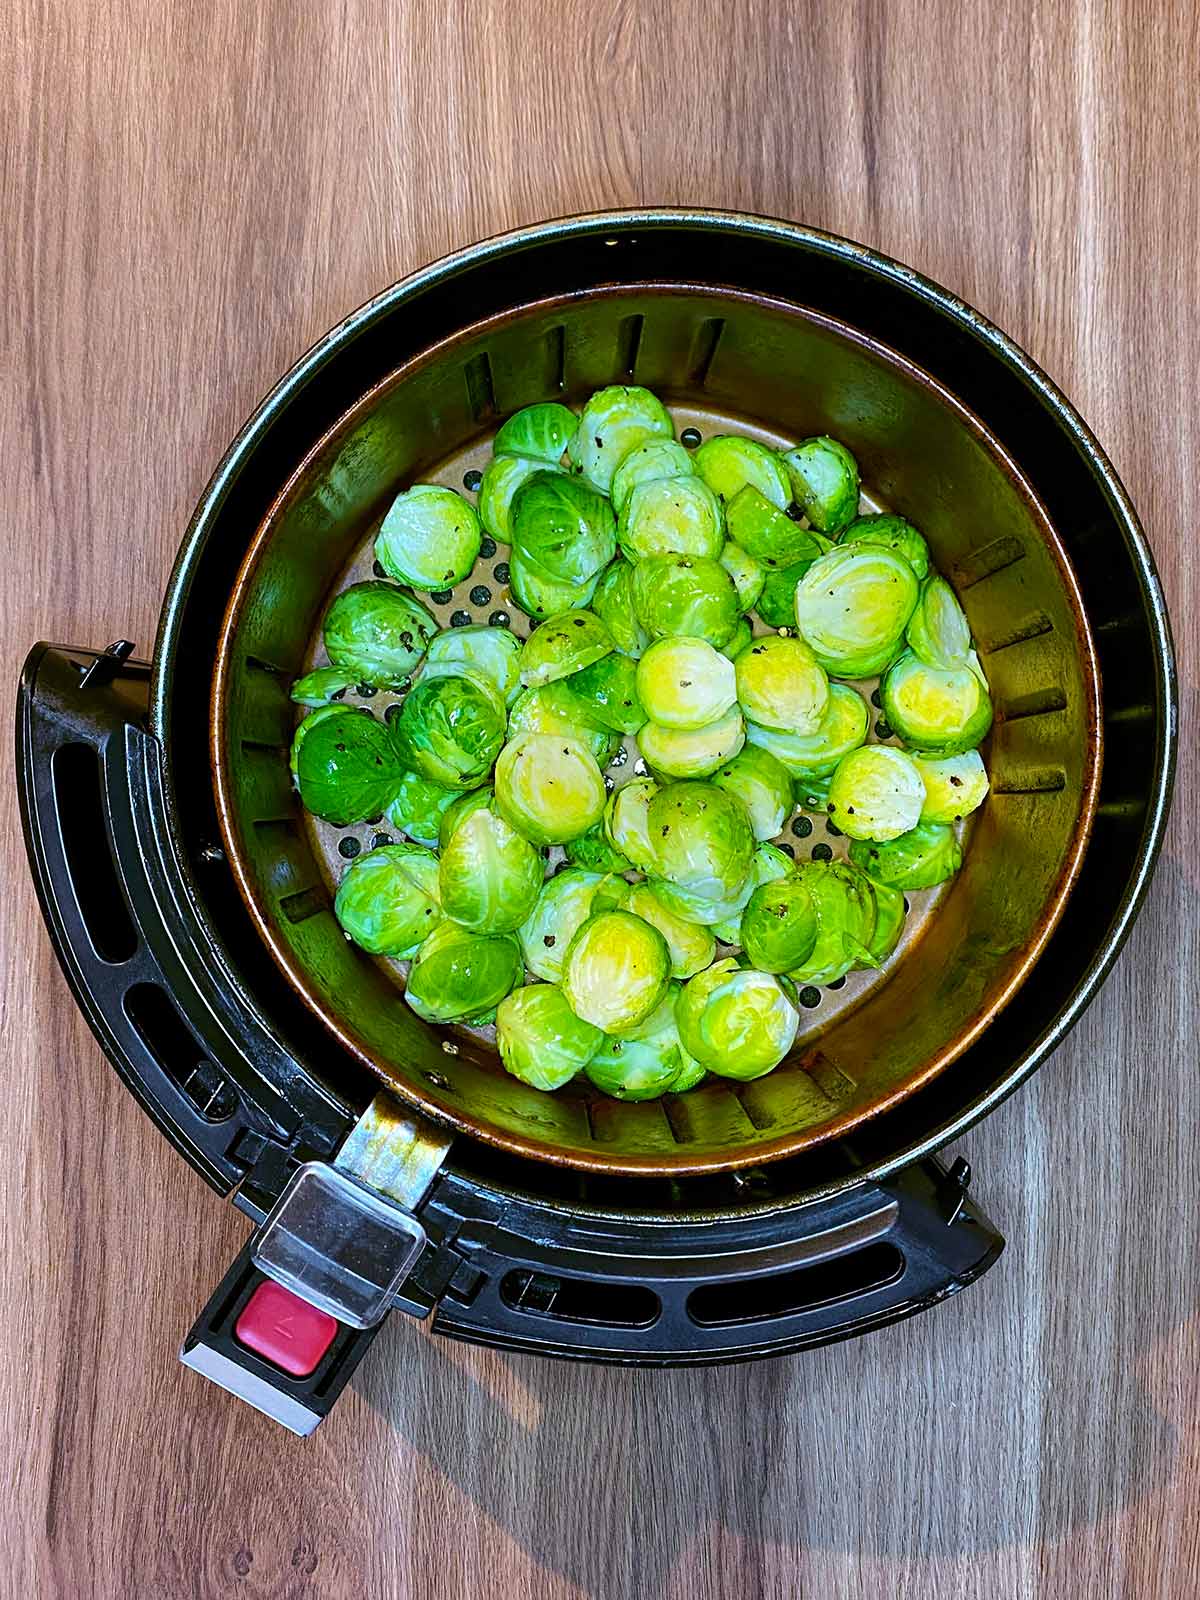 An air fryer basket containing the sprouts.